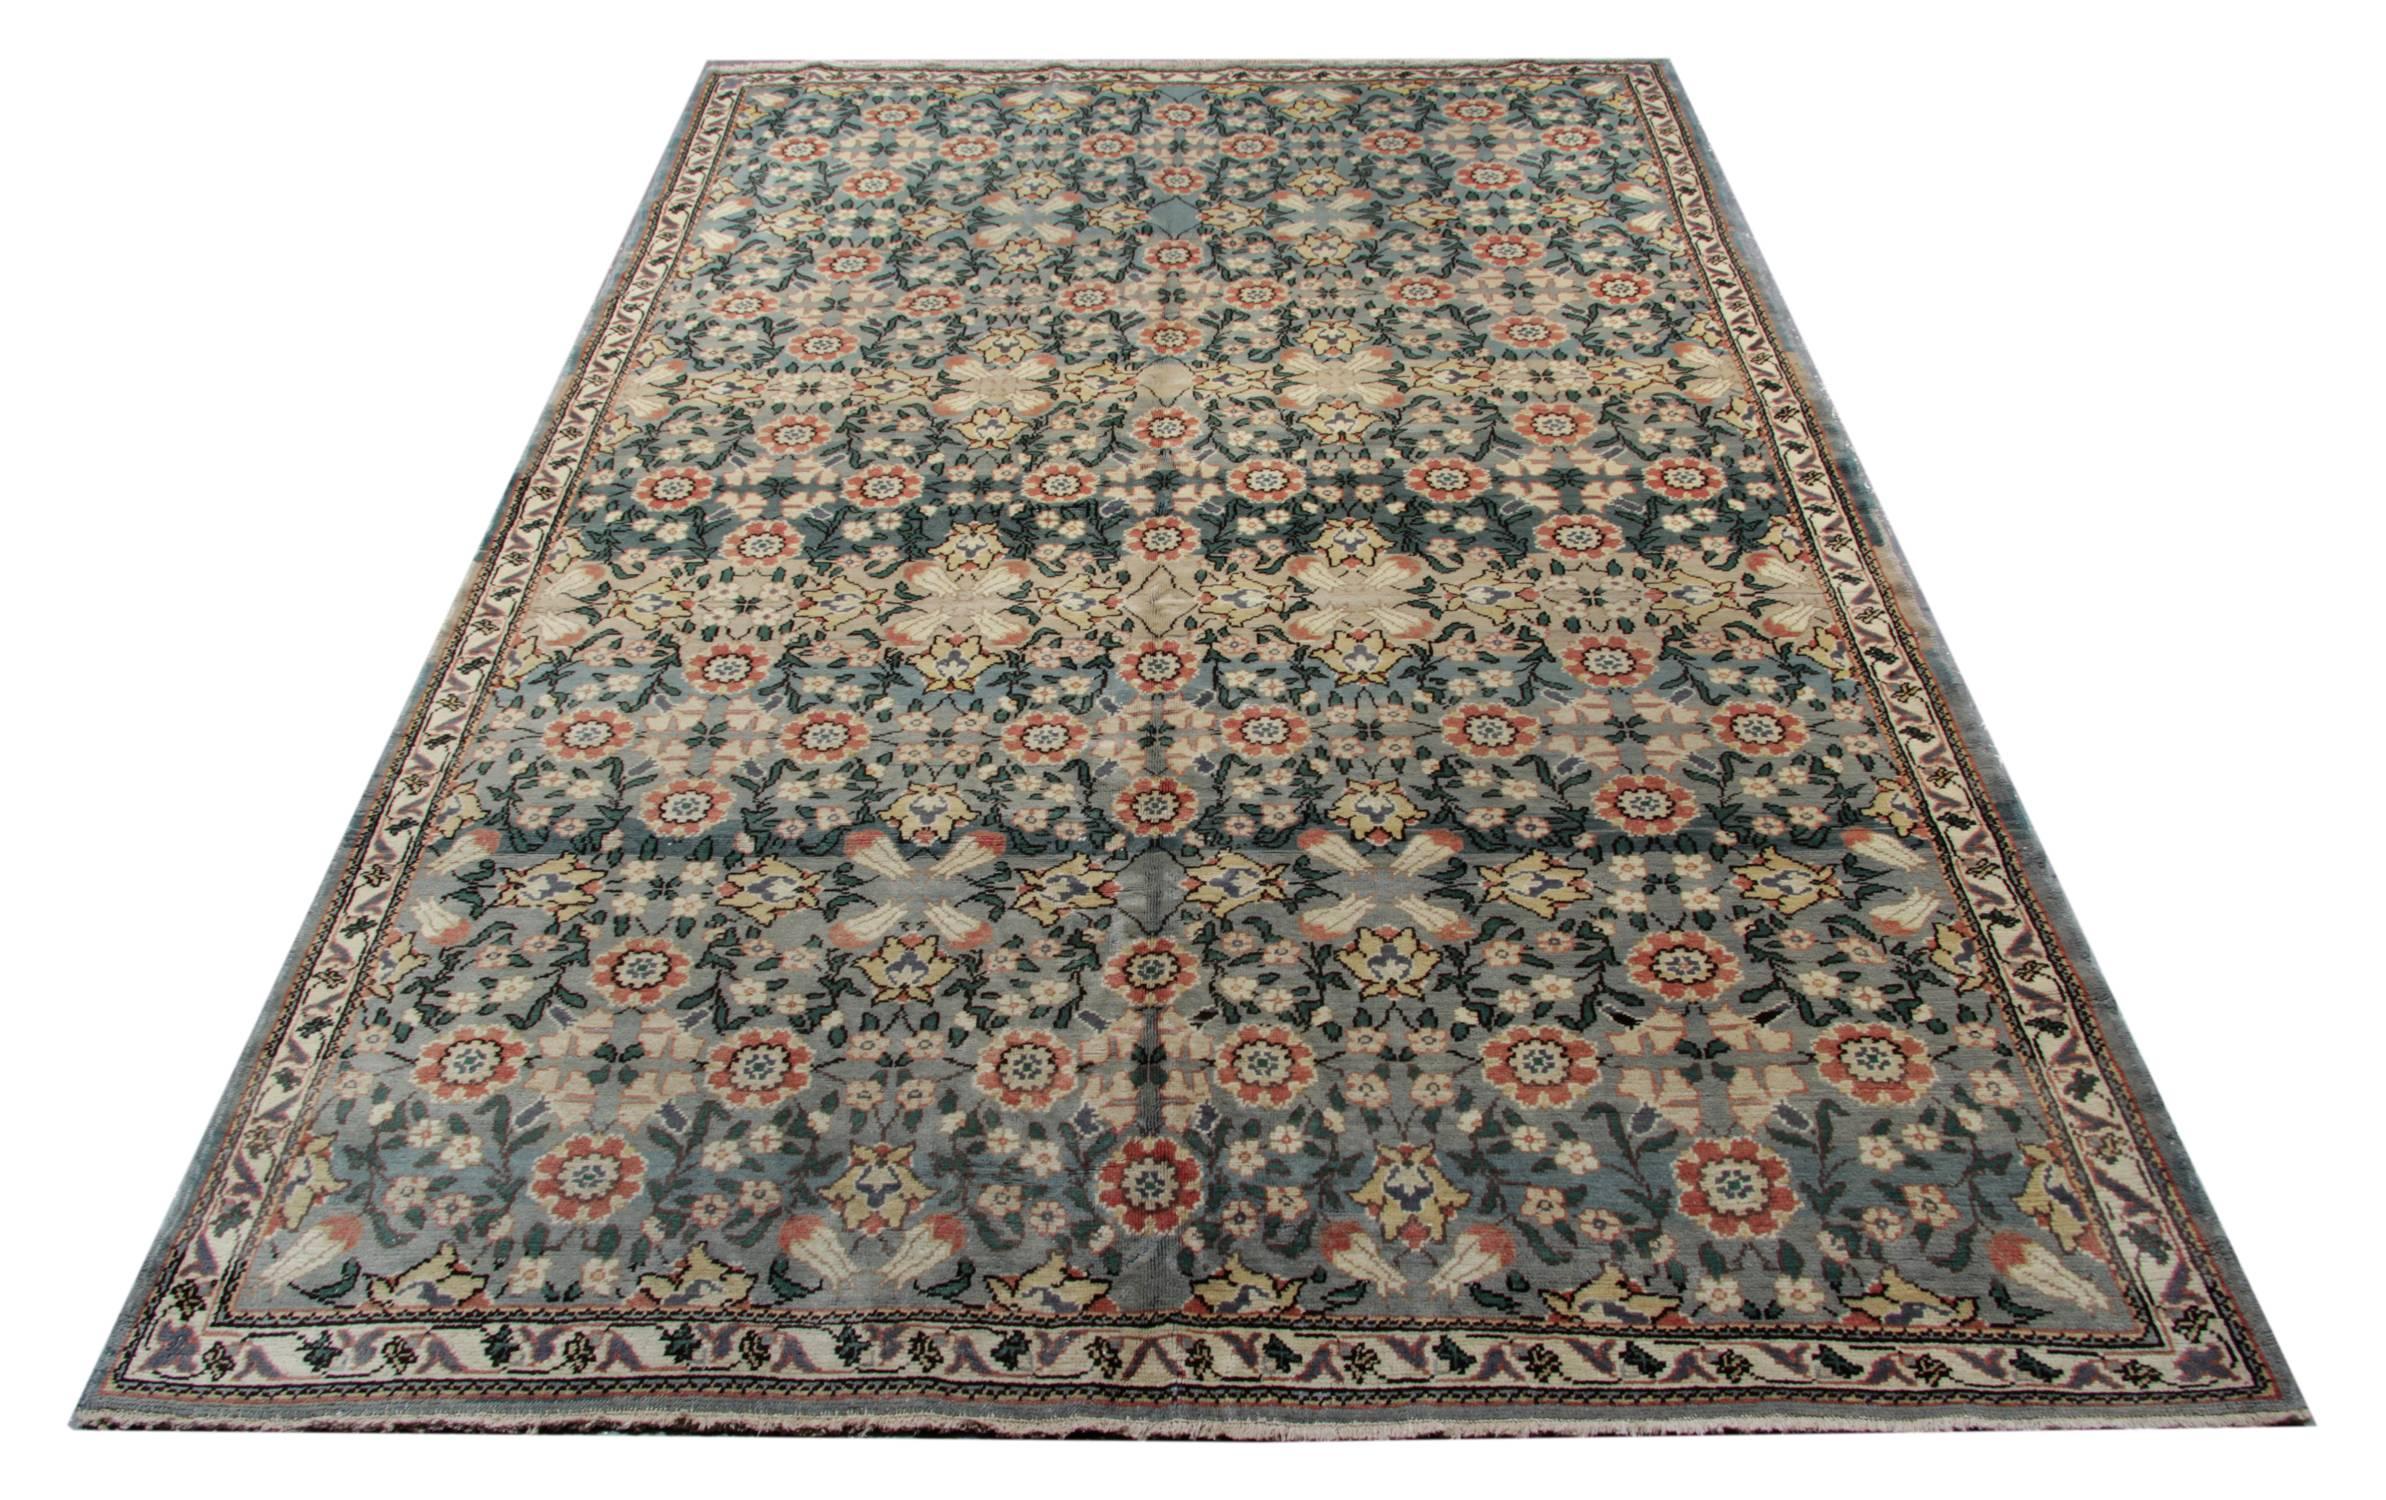 This handmade rug is an old Turkish Ushak Oushak carpet, circa 1950 and is a patterned rug with an all-over floral design 100% natural rugs made of organic dyes in excellent condition. This grey Oriental rug can be suitable for dining room or living